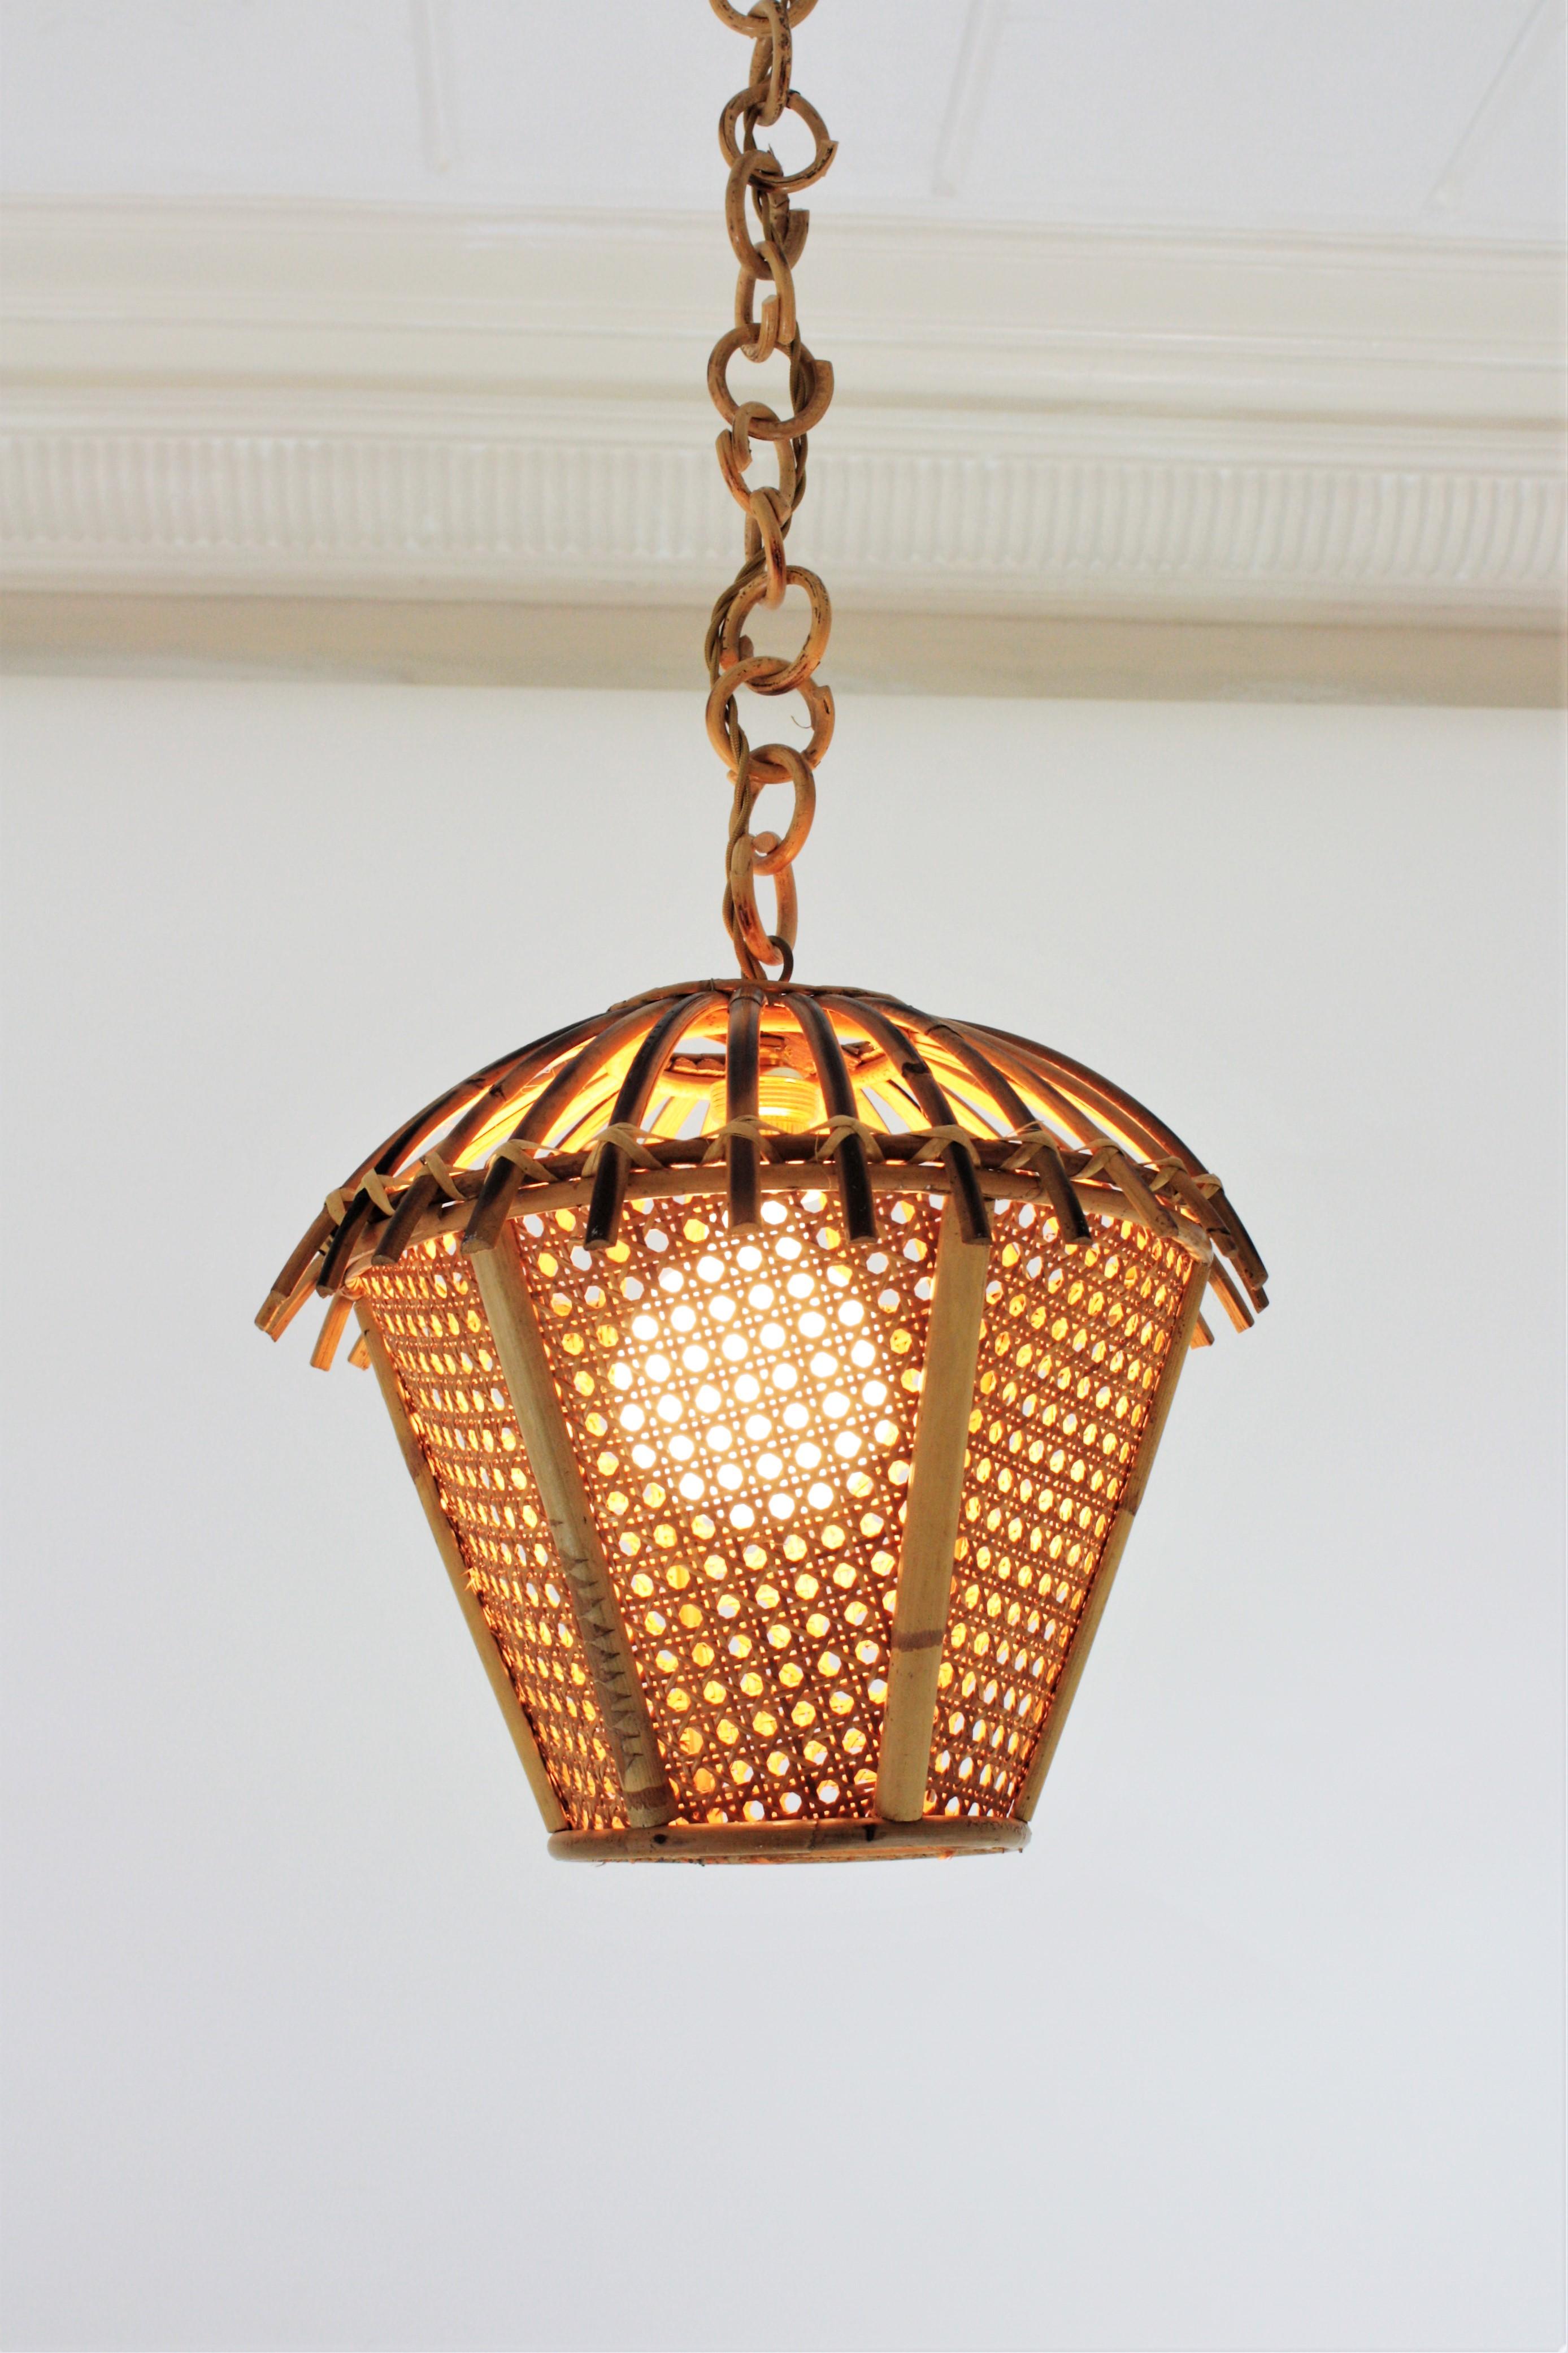 Italian Modernist Rattan and Wicker Wire Pagoda Pendant or Hanging Light, 1960s For Sale 4